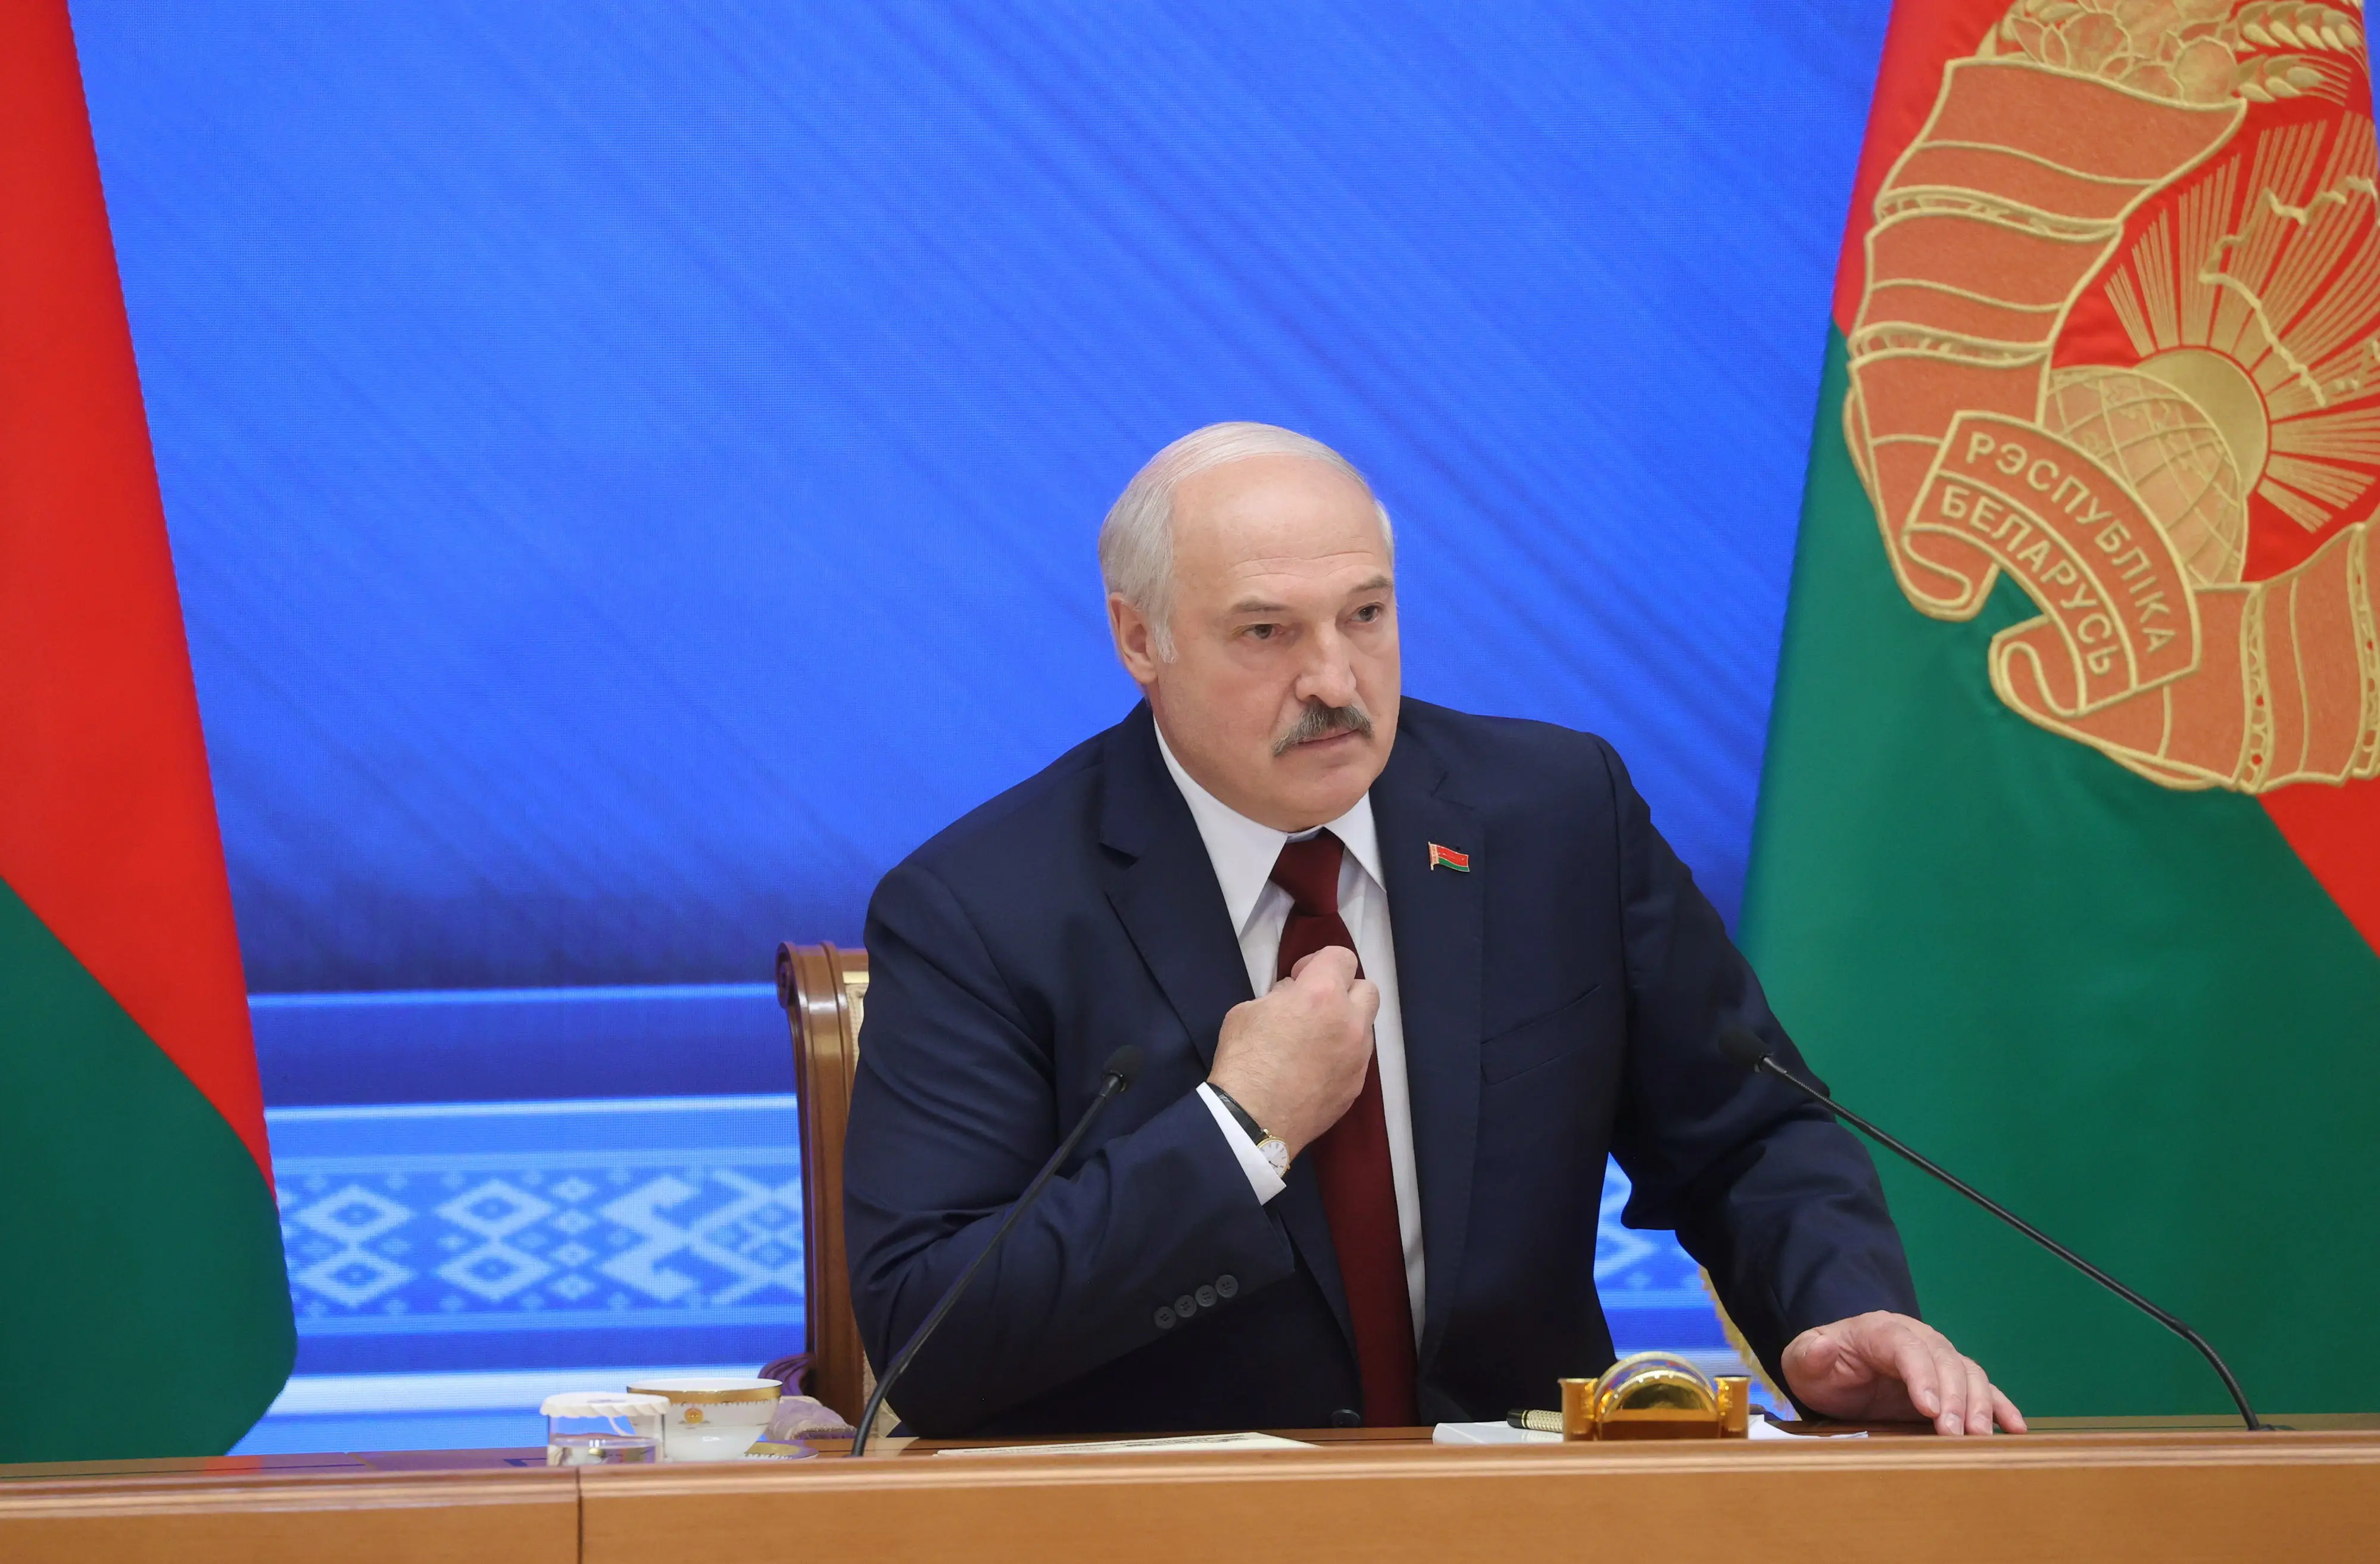 Belarusian President Alexander Lukashenko holds a news conference in Minsk, Belarus August 9, 2021. Nikolay Petrov/BelTA/Handout via REUTERS ATTENTION EDITORS - THIS IMAGE WAS PROVIDED BY A THIRD PARTY. NO RESALES. NO ARCHIVES. MANDATORY CREDIT.